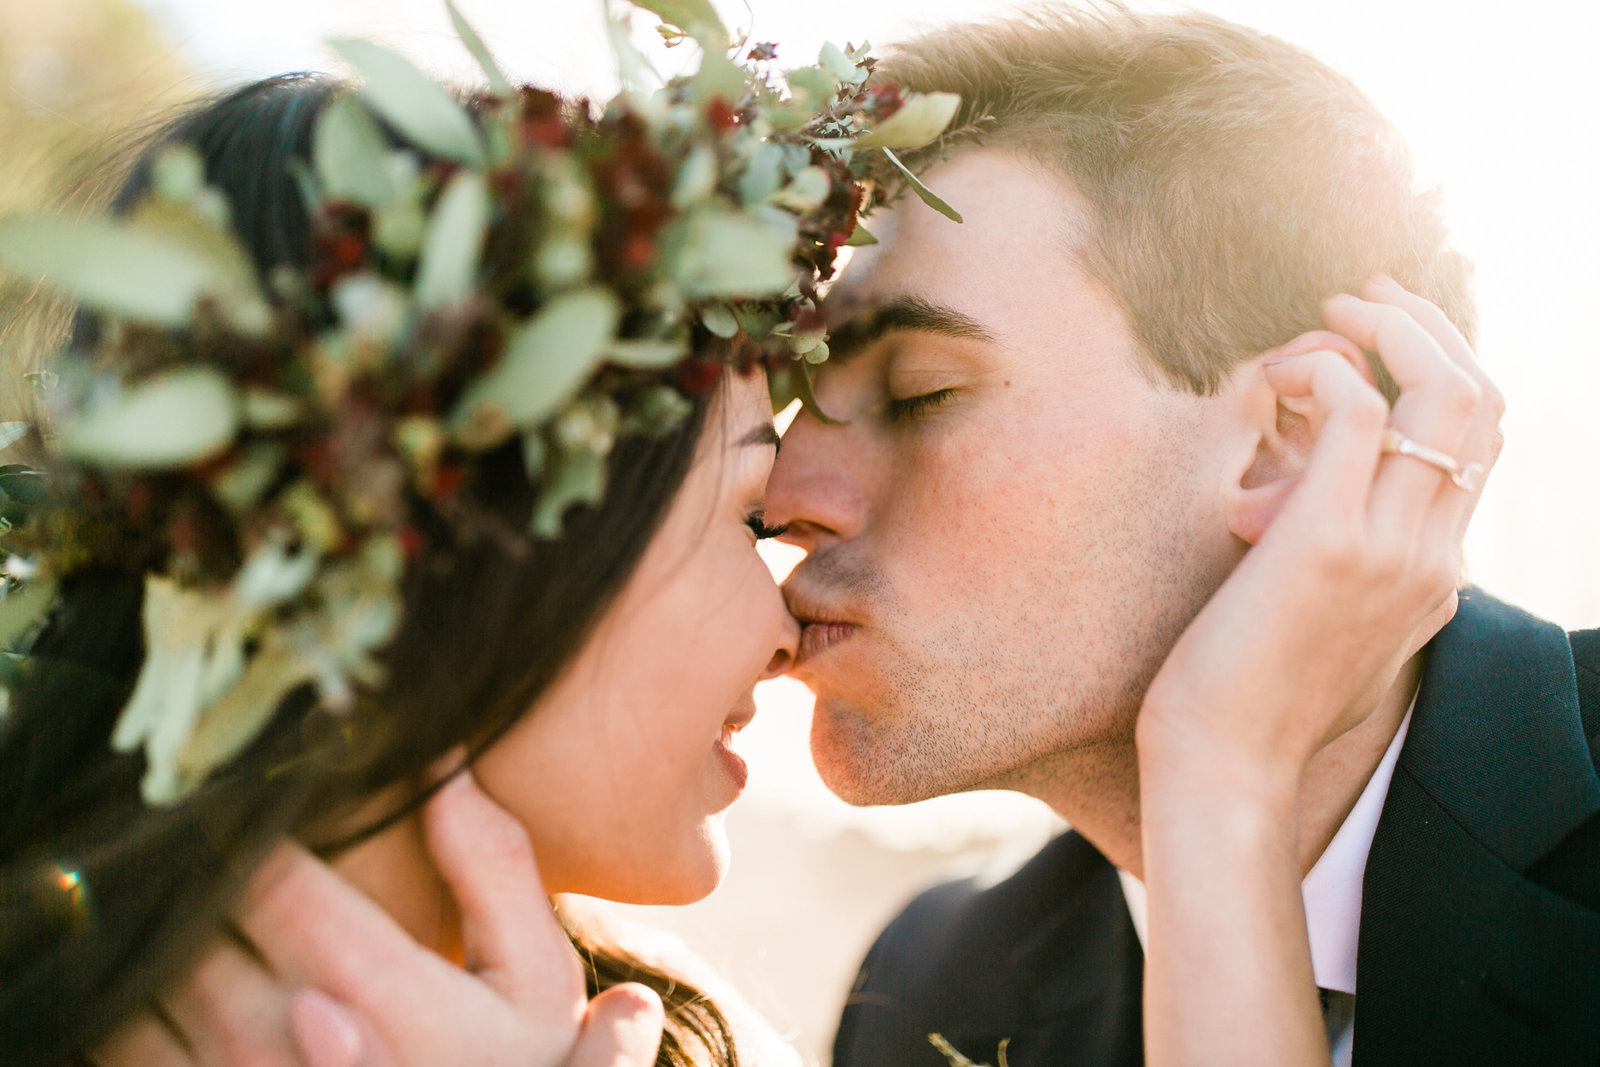 In joshua tree the groom leans in to kiss the brides nose. Sunlight pours over them at sunset.